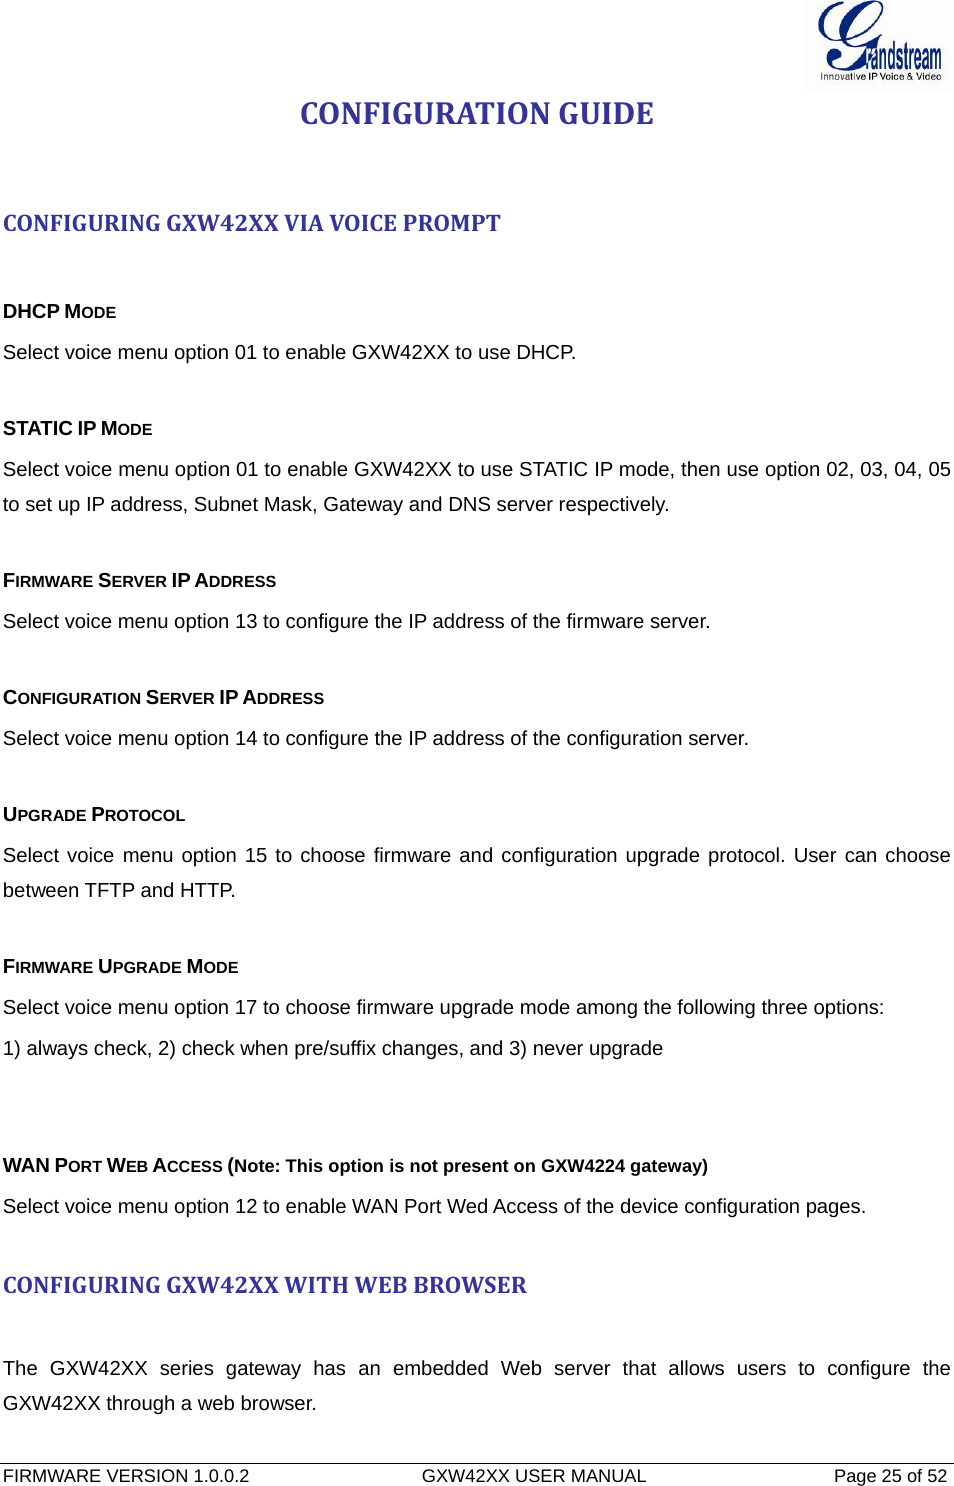  FIRMWARE VERSION 1.0.0.2                                  GXW42XX USER MANUAL                                     Page 25 of 52   CONFIGURATIONGUIDECONFIGURINGGXW42XXVIAVOICEPROMPTDHCP MODE Select voice menu option 01 to enable GXW42XX to use DHCP.  STATIC IP MODE  Select voice menu option 01 to enable GXW42XX to use STATIC IP mode, then use option 02, 03, 04, 05 to set up IP address, Subnet Mask, Gateway and DNS server respectively.  FIRMWARE SERVER IP ADDRESS  Select voice menu option 13 to configure the IP address of the firmware server.   CONFIGURATION SERVER IP ADDRESS  Select voice menu option 14 to configure the IP address of the configuration server.   UPGRADE PROTOCOL  Select voice menu option 15 to choose firmware and configuration upgrade protocol. User can choose between TFTP and HTTP.  FIRMWARE UPGRADE MODE  Select voice menu option 17 to choose firmware upgrade mode among the following three options:  1) always check, 2) check when pre/suffix changes, and 3) never upgrade   WAN PORT WEB ACCESS (Note: This option is not present on GXW4224 gateway) Select voice menu option 12 to enable WAN Port Wed Access of the device configuration pages.  CONFIGURINGGXW42XXWITHWEBBROWSERThe GXW42XX series gateway has an embedded Web server that allows users to configure the GXW42XX through a web browser. 